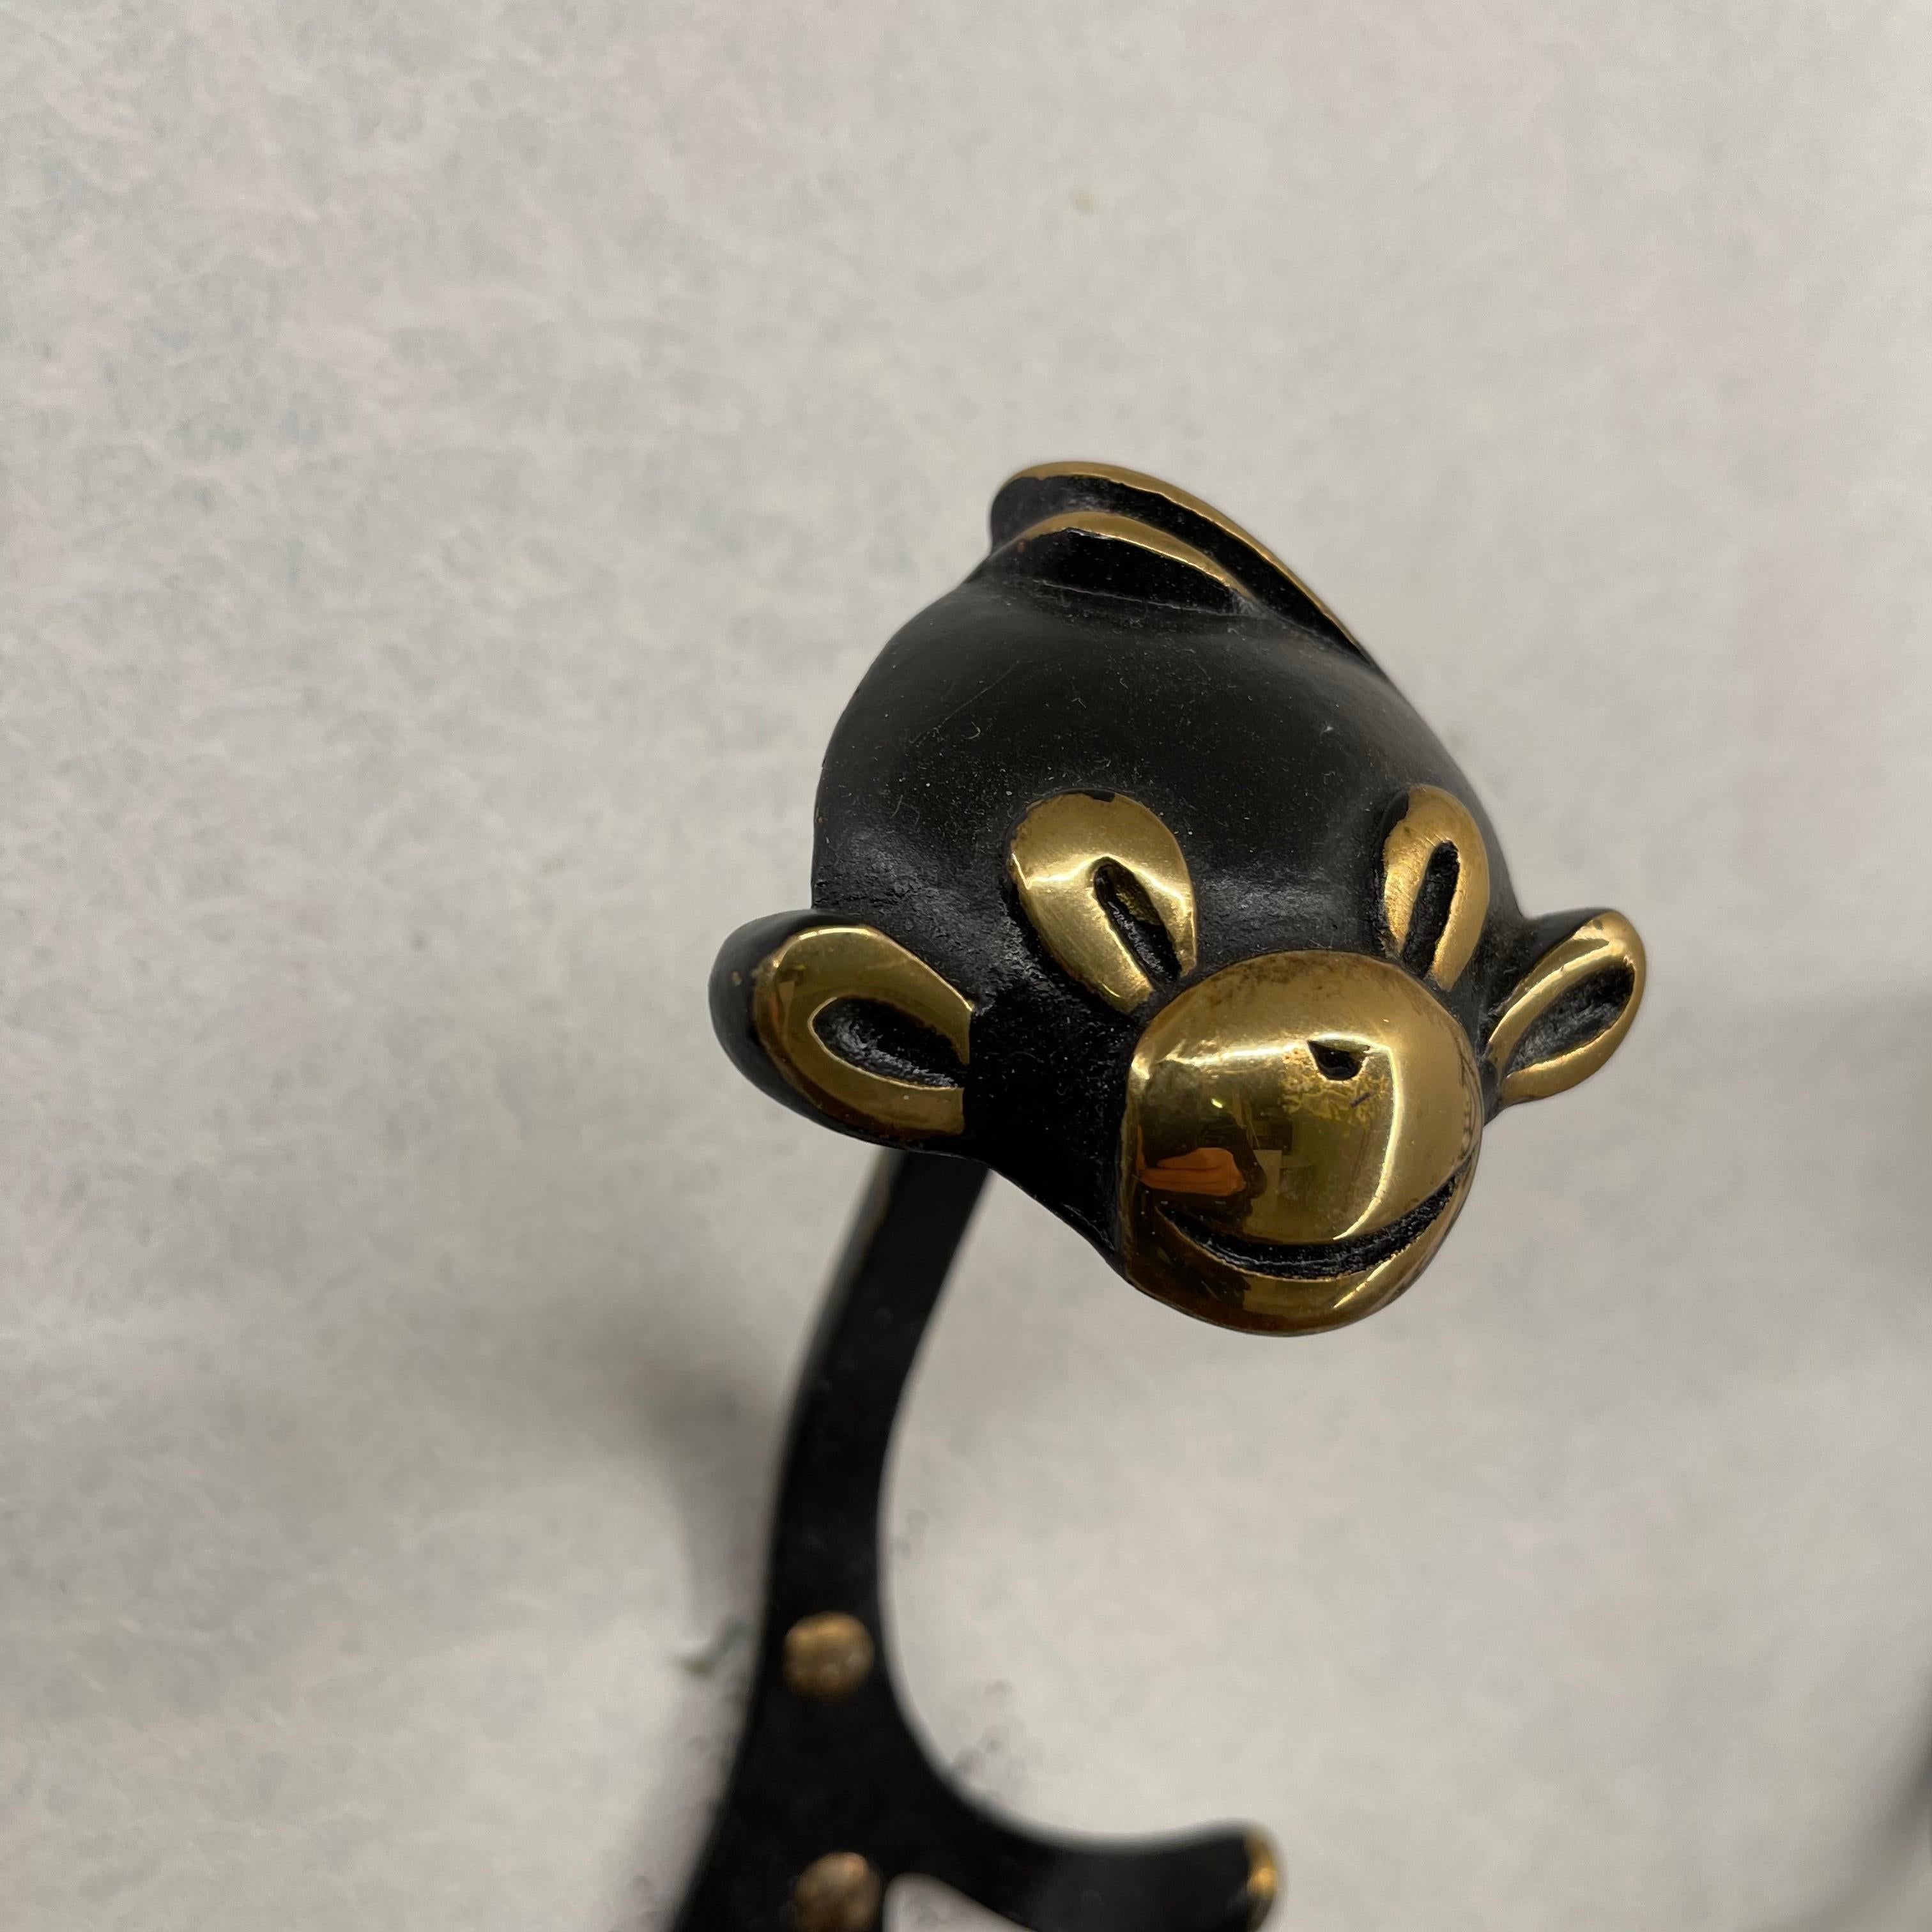 Walter Bosse Brass Wall Hooks Model 'Zoo', 6 Pieces Available, Austria 1950s For Sale 9